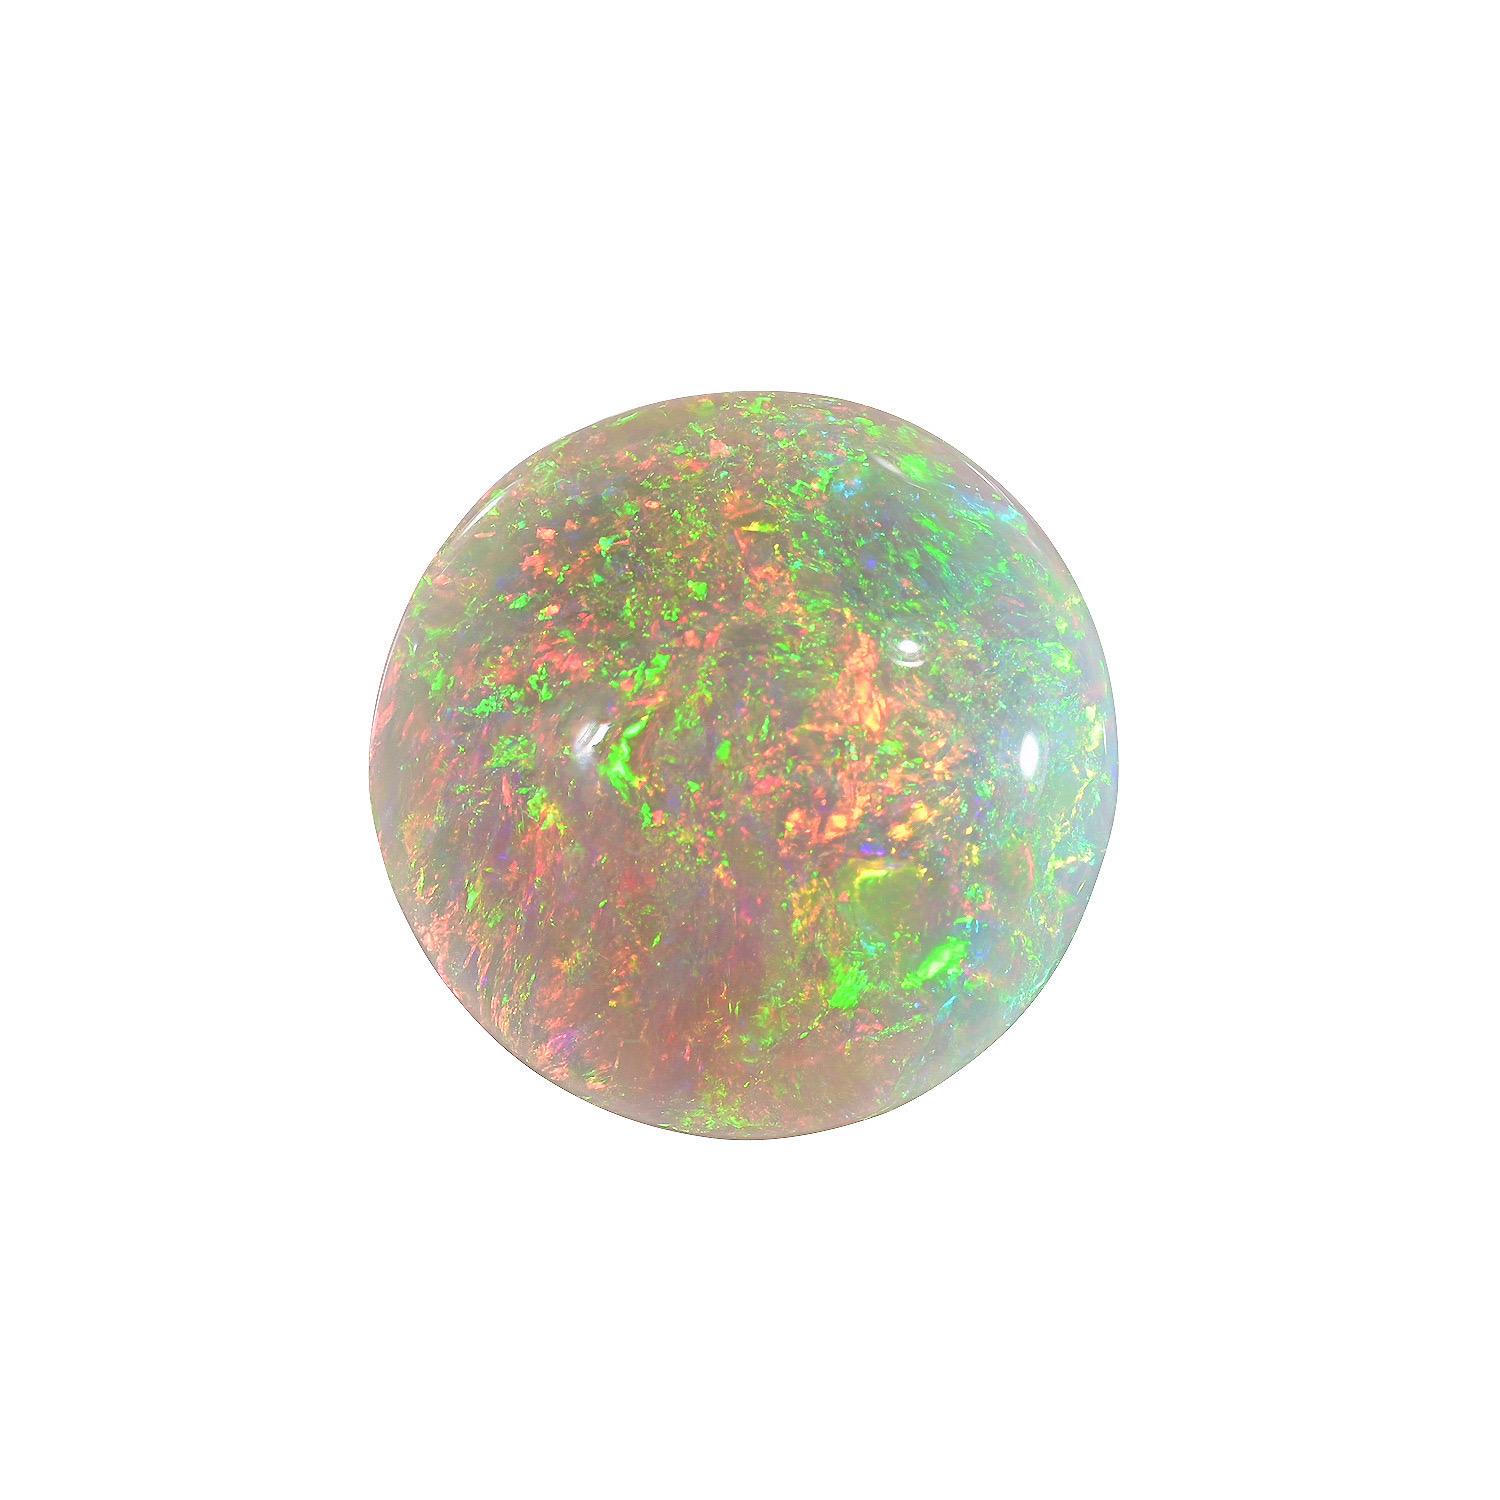 Natural 16.94 Carat round Ethiopian Opal loose gemstone, offered unmounted to a fine gem connoisseur.
Returns are accepted and paid by us within 7 days of delivery.
We offer supreme custom jewelry work upon request. Please contact us for more